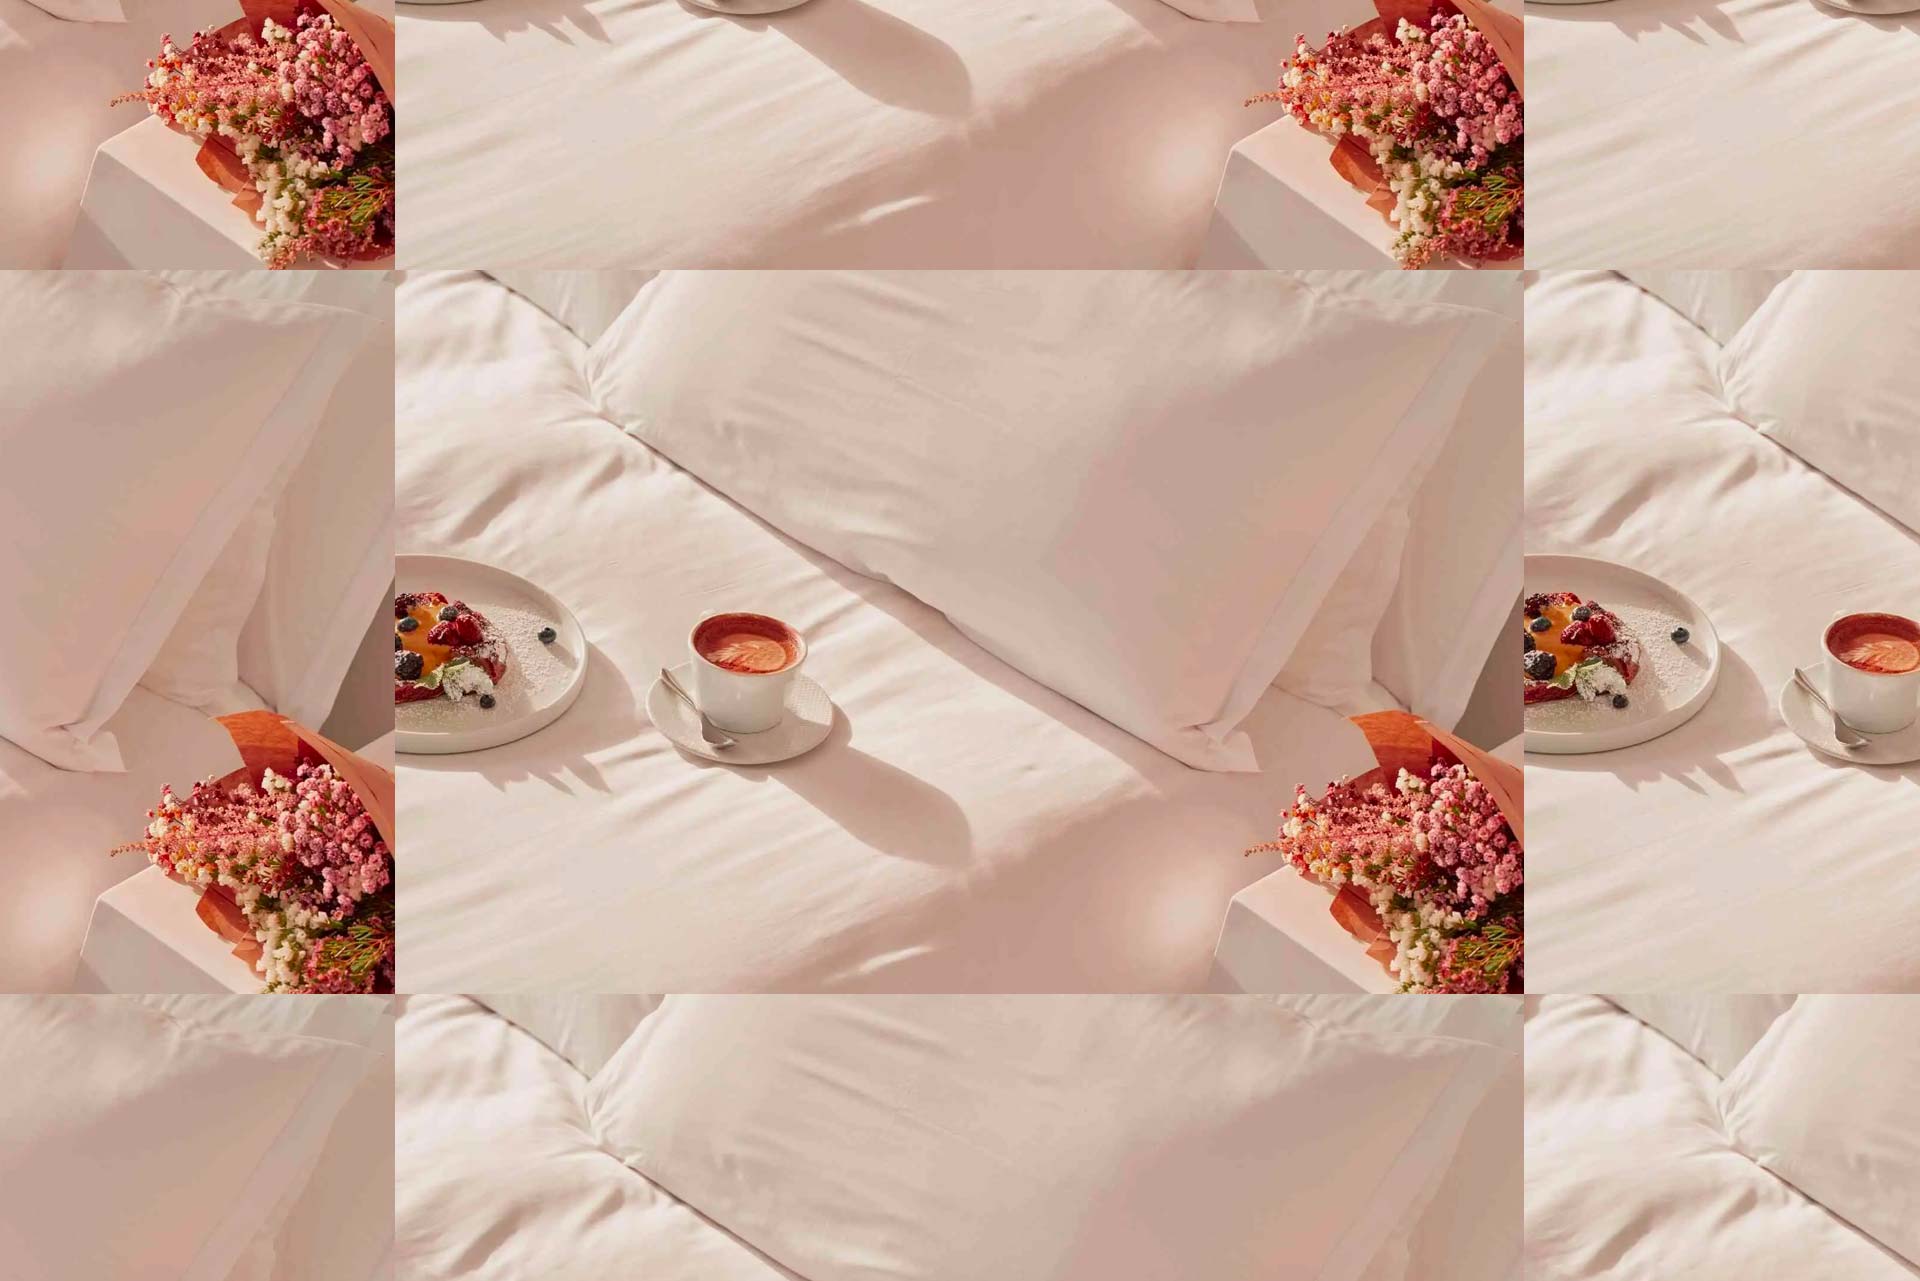 Repeating image of coffee, breakfast dish, and bouquet of flowers on a white bed